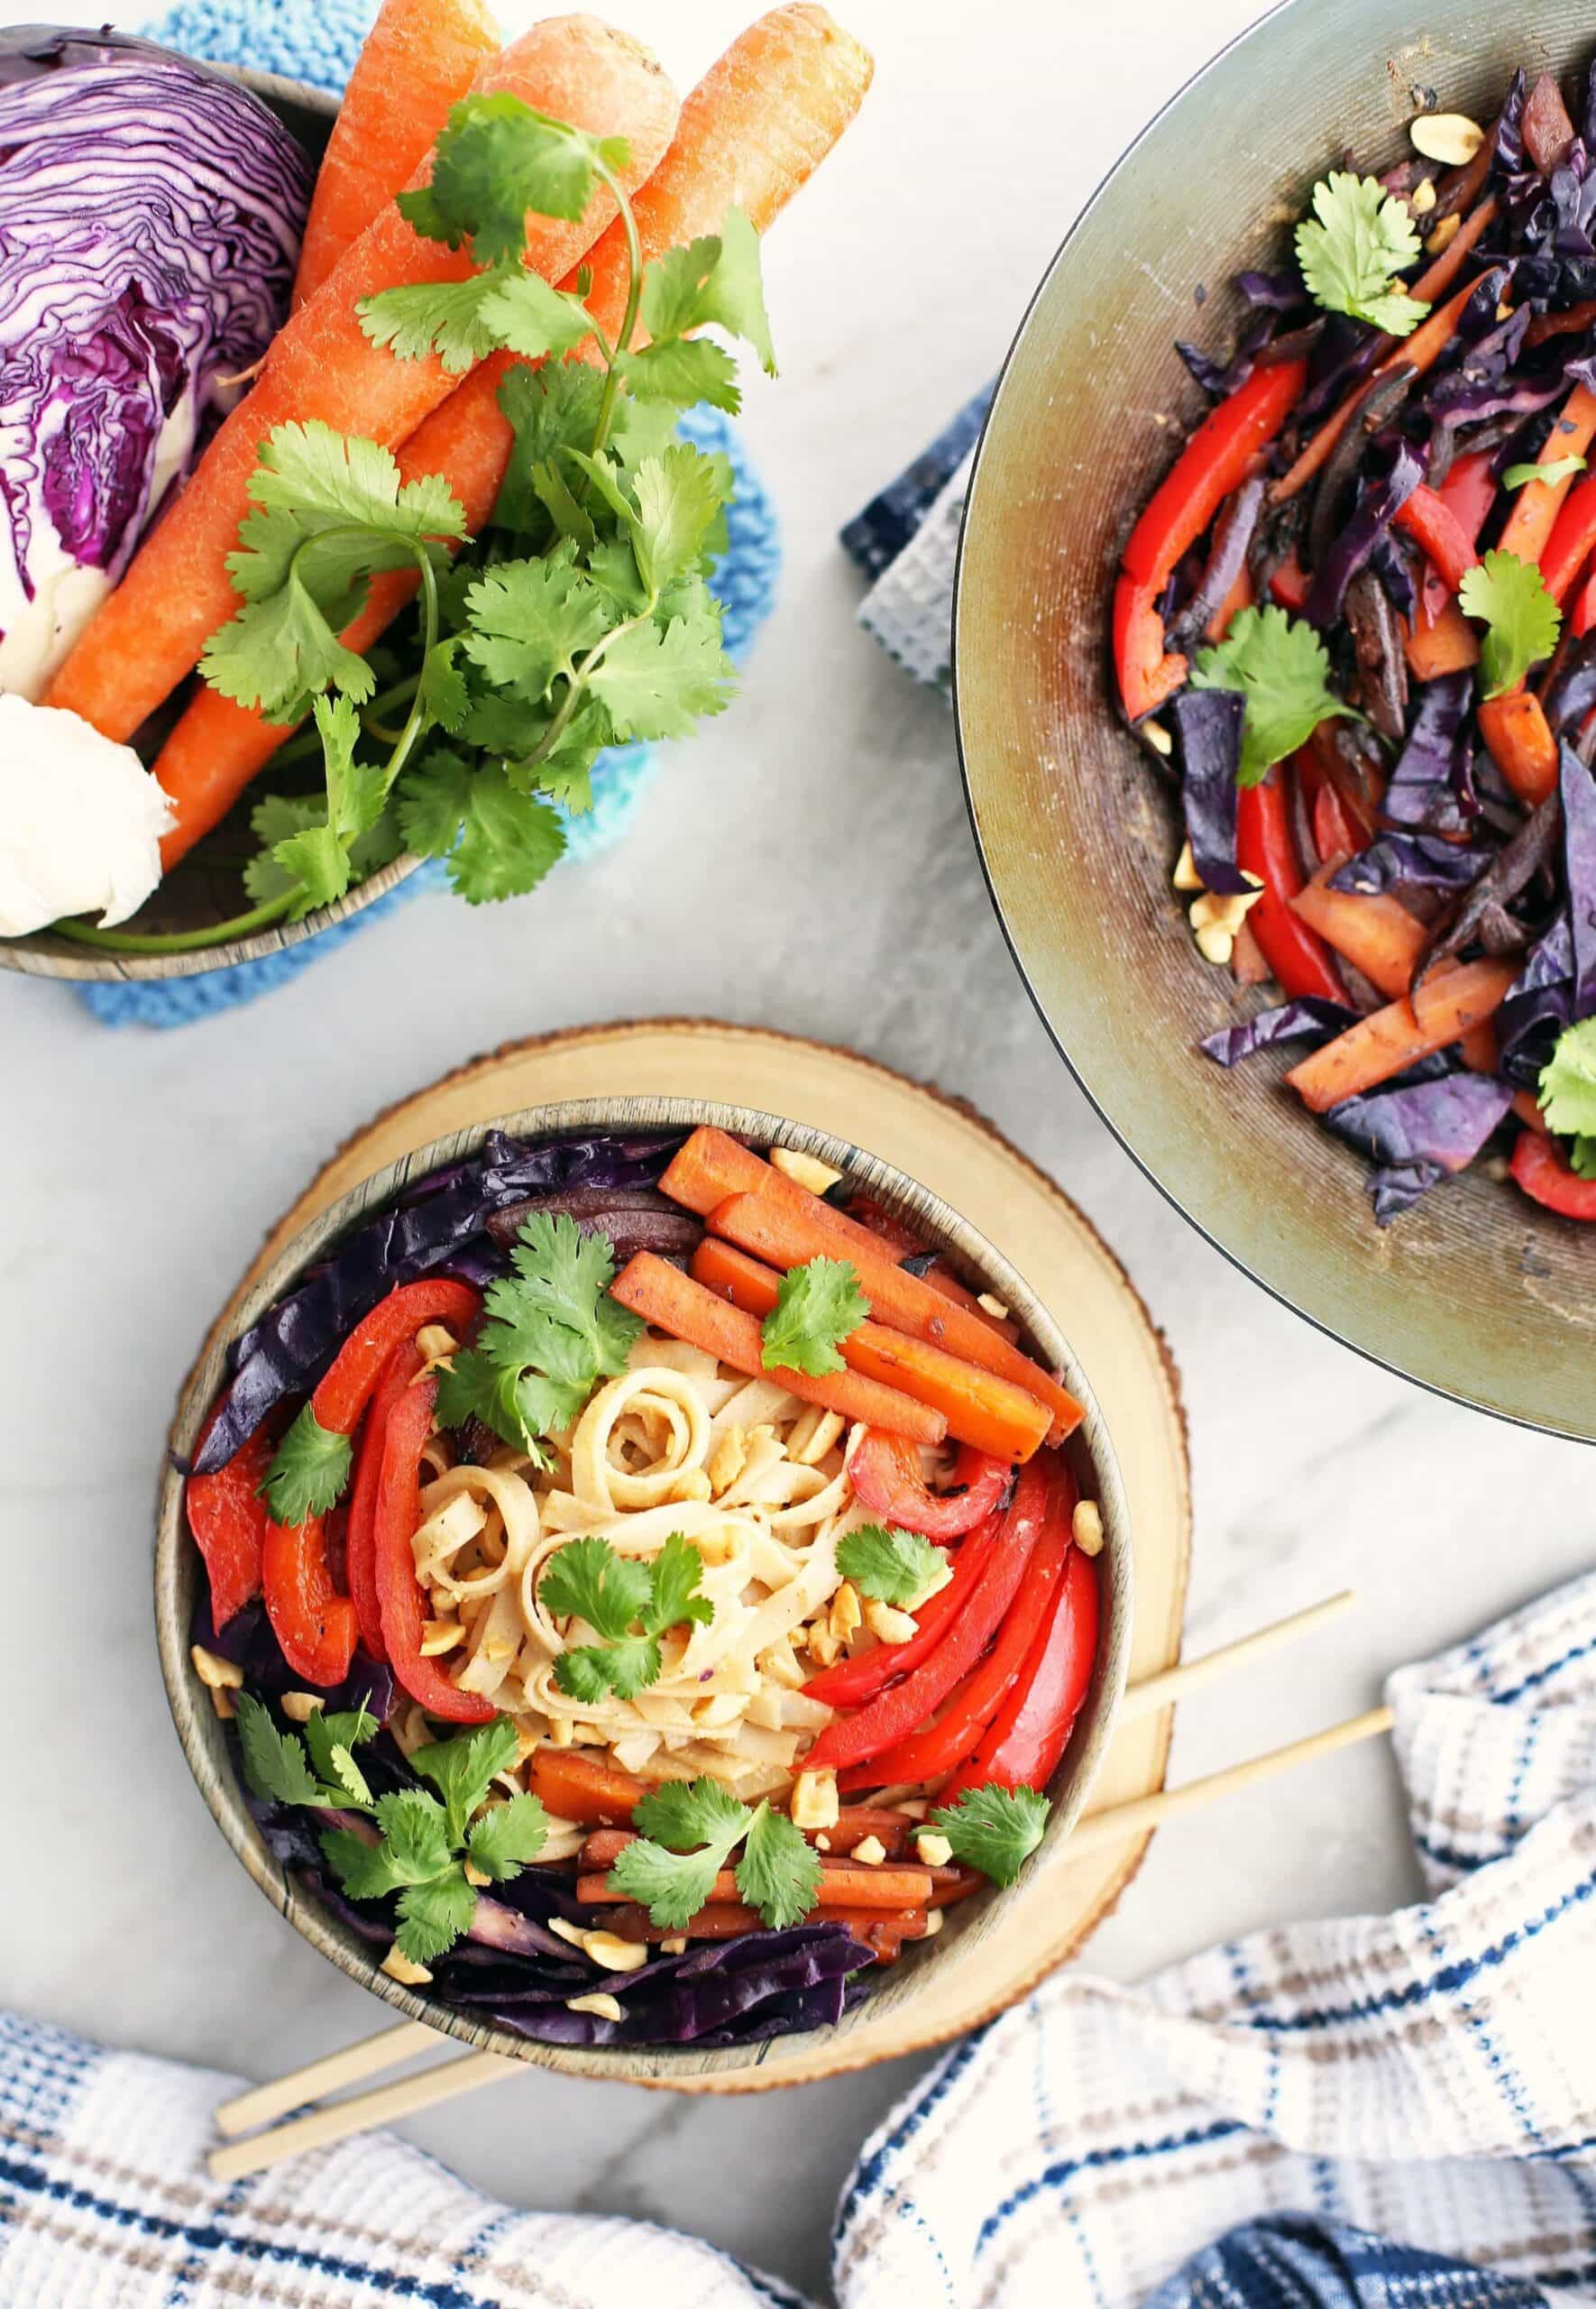 Easy Stir-Fried Vegetables and Noodles with Peanut Butter Sauce